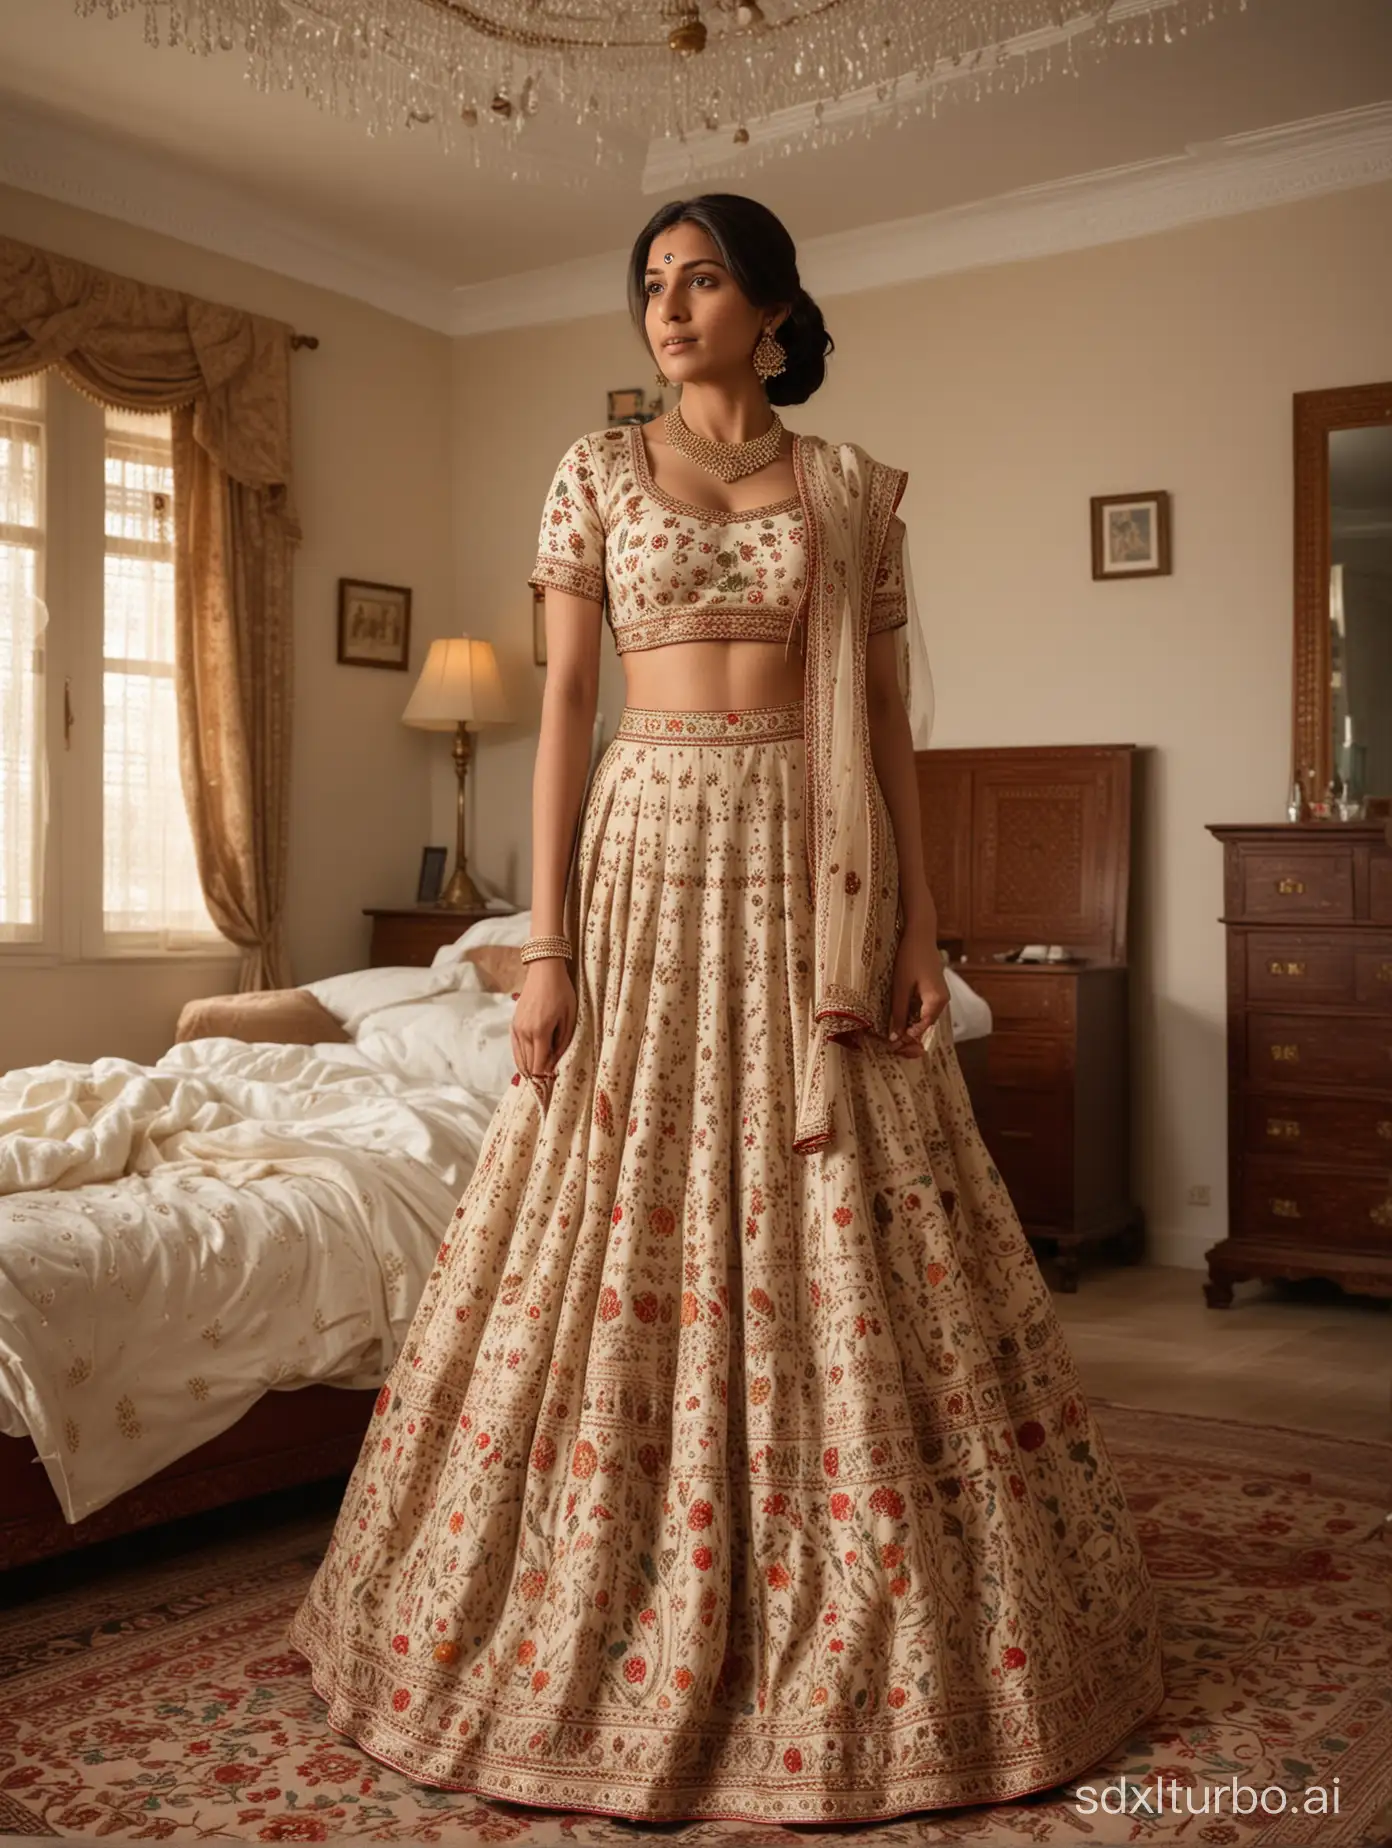 Indian woman in neutral lehenga printed in pichwai motifs and embroidered with pearls and resham standing in a bedroom which is furnished in traditional Indian style, room brightly lit, emulate Nikon D6 shot, wide angle shot, soft warm lighting, photorealistic